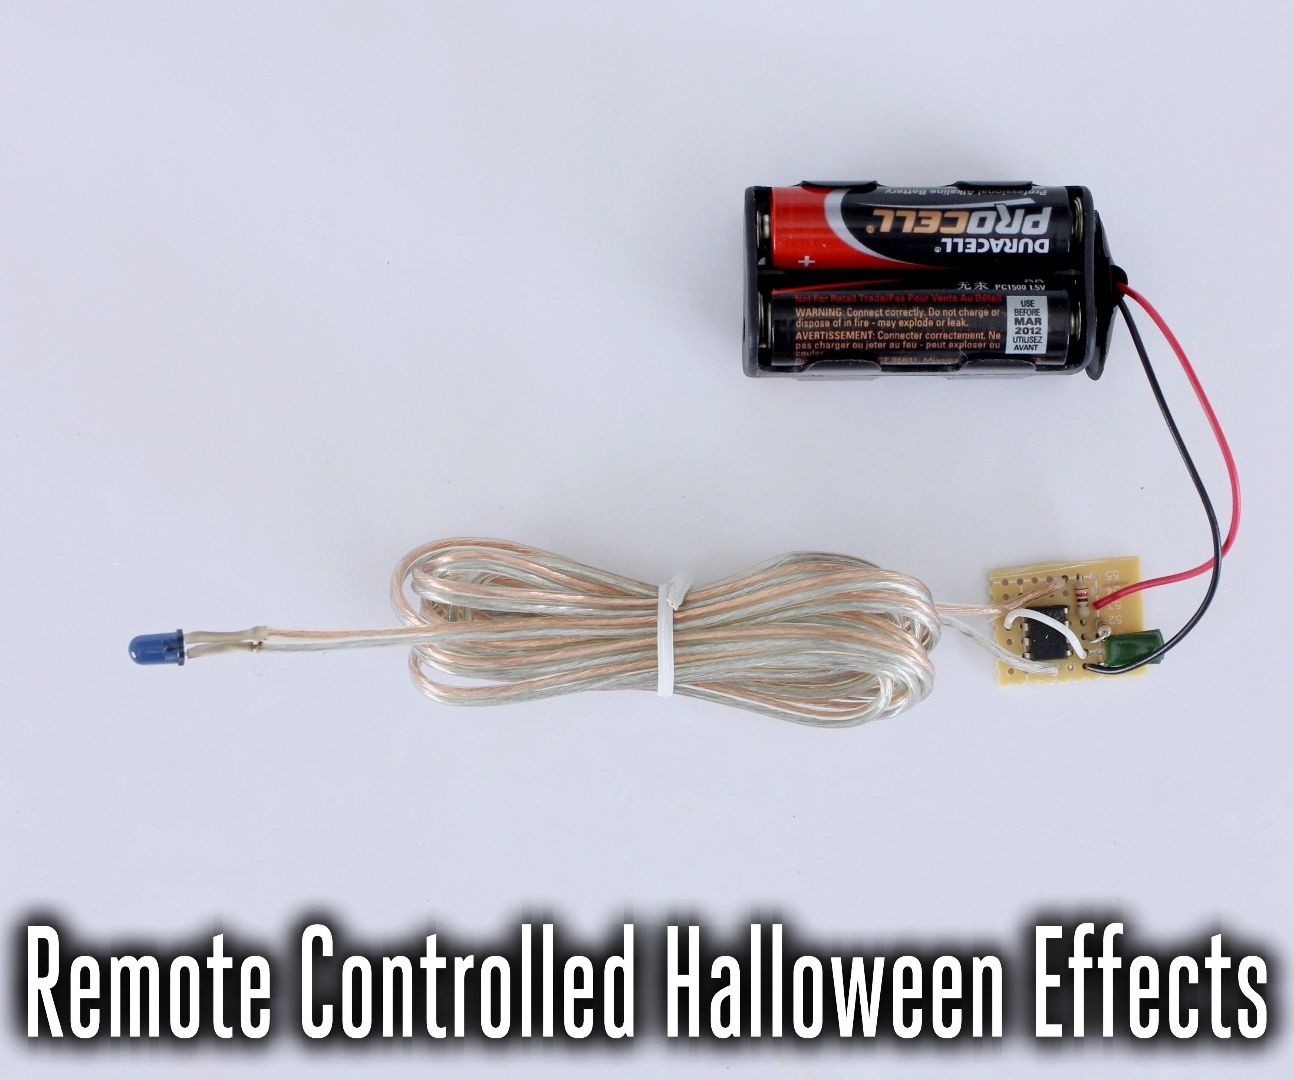 Controlling Halloween Effects With DIY Infrared Remote Controls